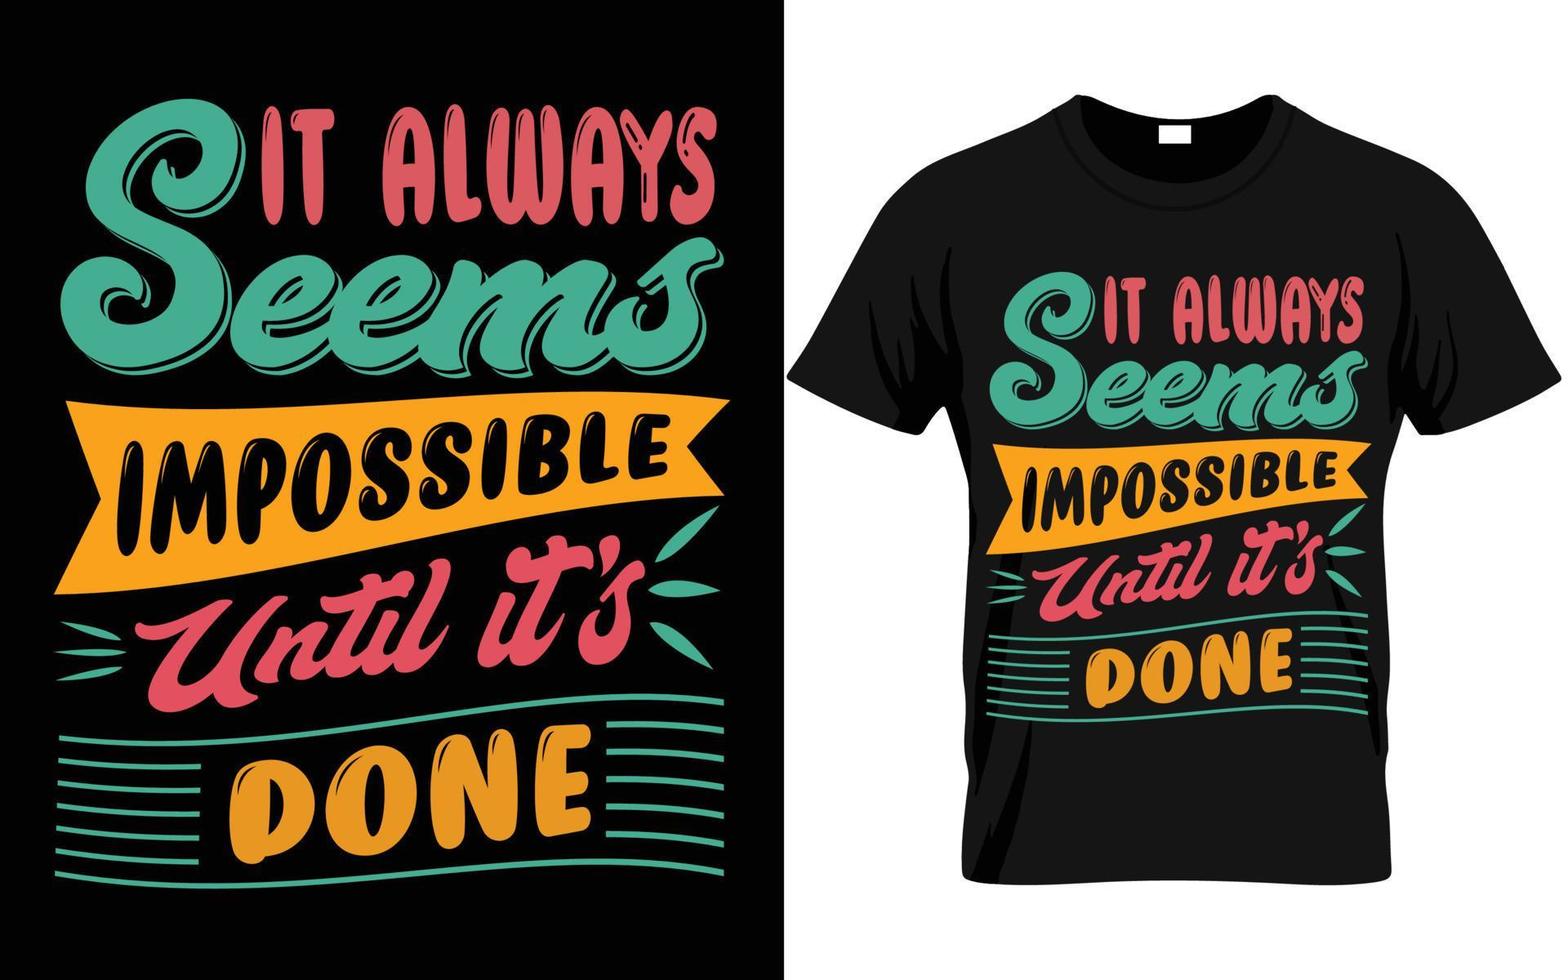 IT always seems impossible until it's done t-shirt vector